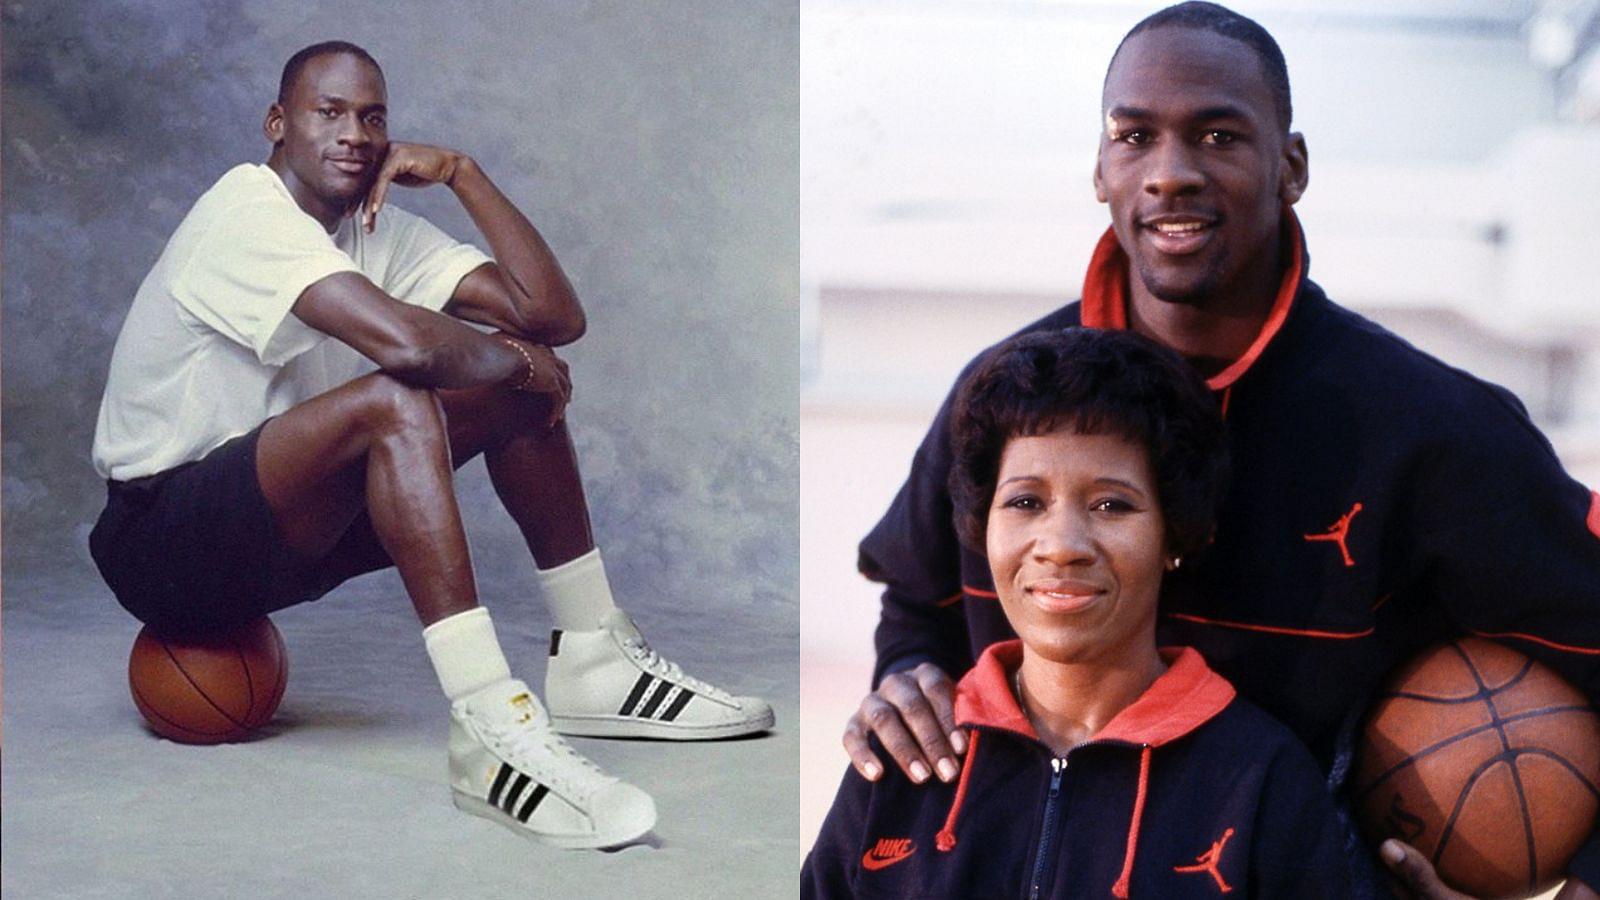 Michael Jordan was ‘too short’ for Adidas who had 50% larger revenue than $919 million worth Nike in 1984